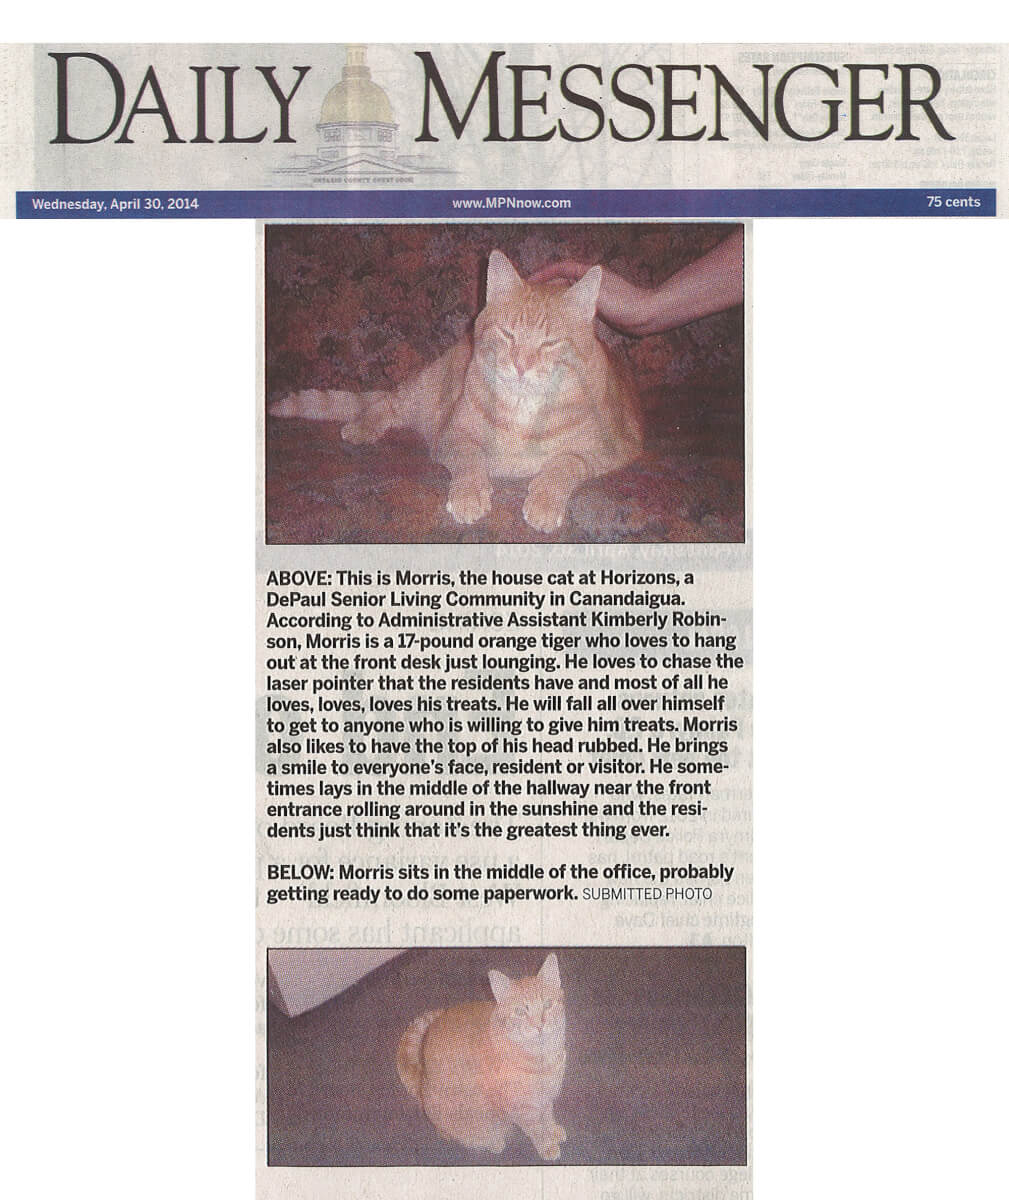 Horizons Assisted Living House Cat Morris in the Daily Messenger April 30, 2014